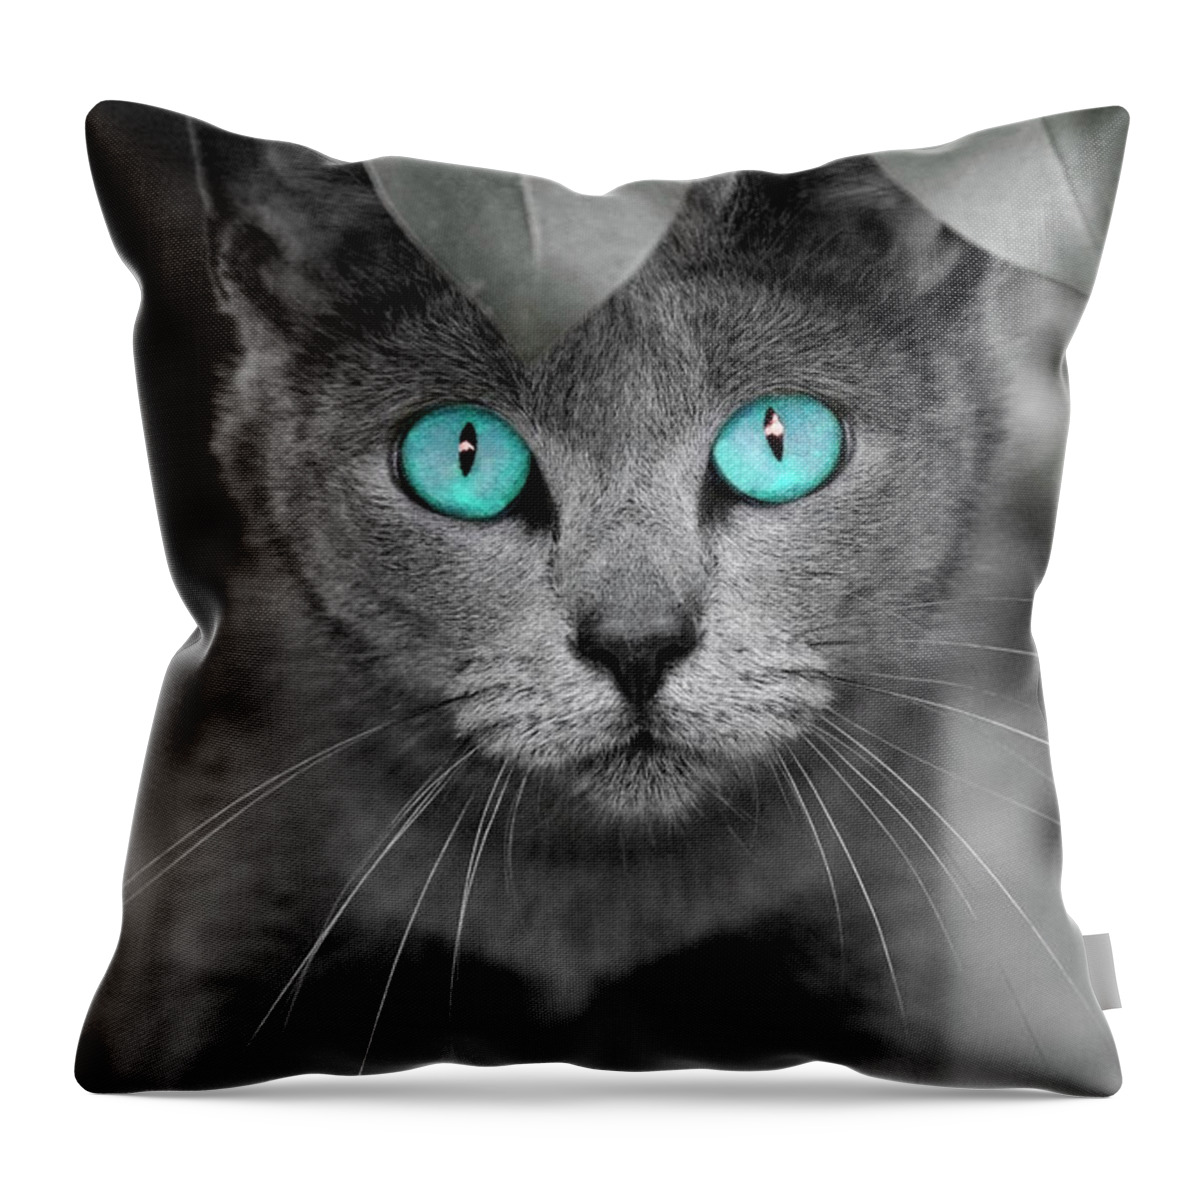 Cats Throw Pillow featuring the photograph Old Blue Eyes by Renee Spade Photography